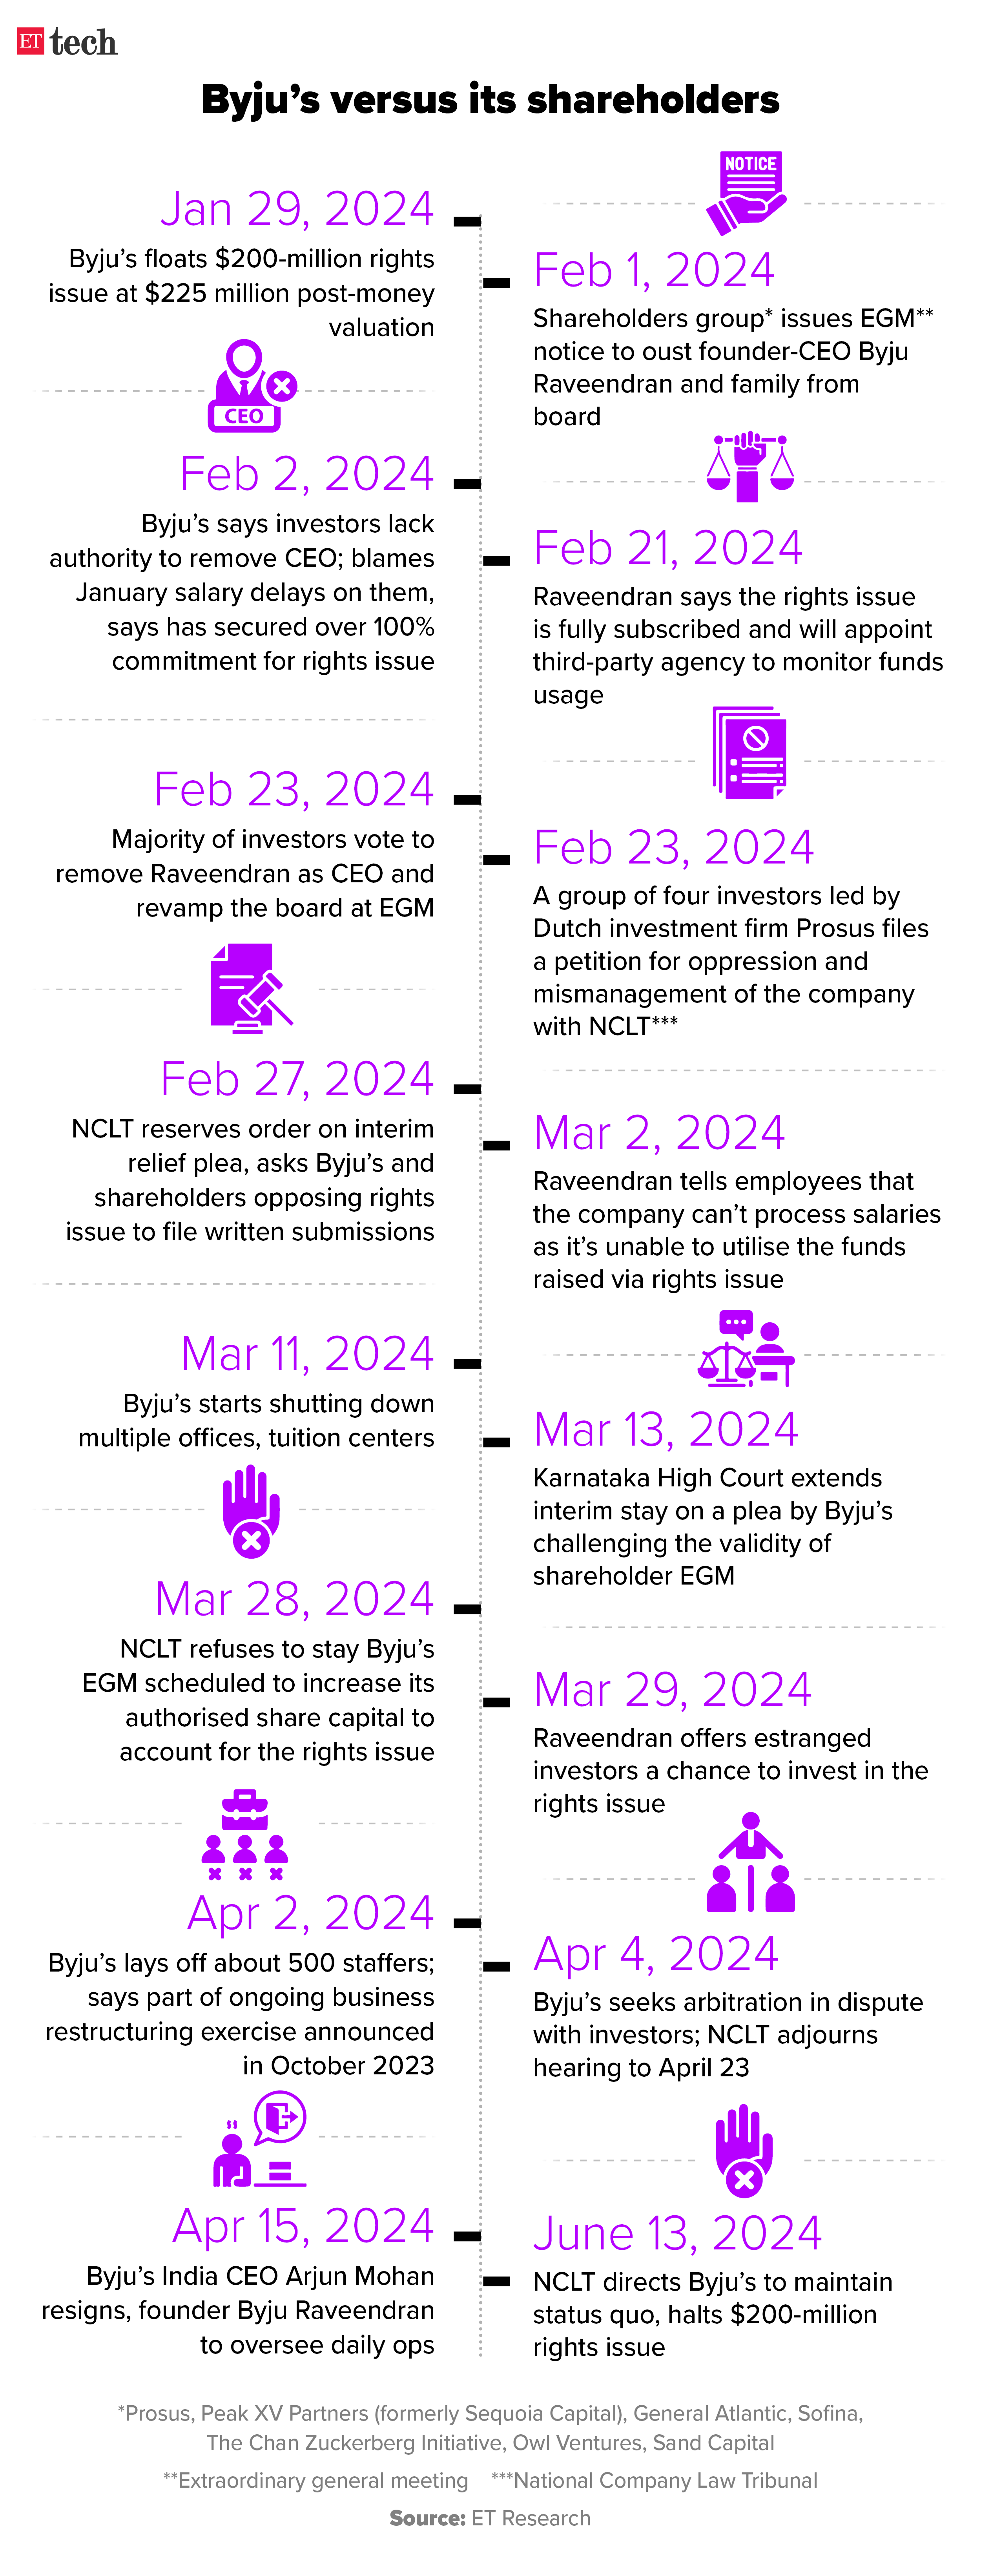 Byjus versus its shareholders_Timeline_13 June 2024_Graphic_ETTECH